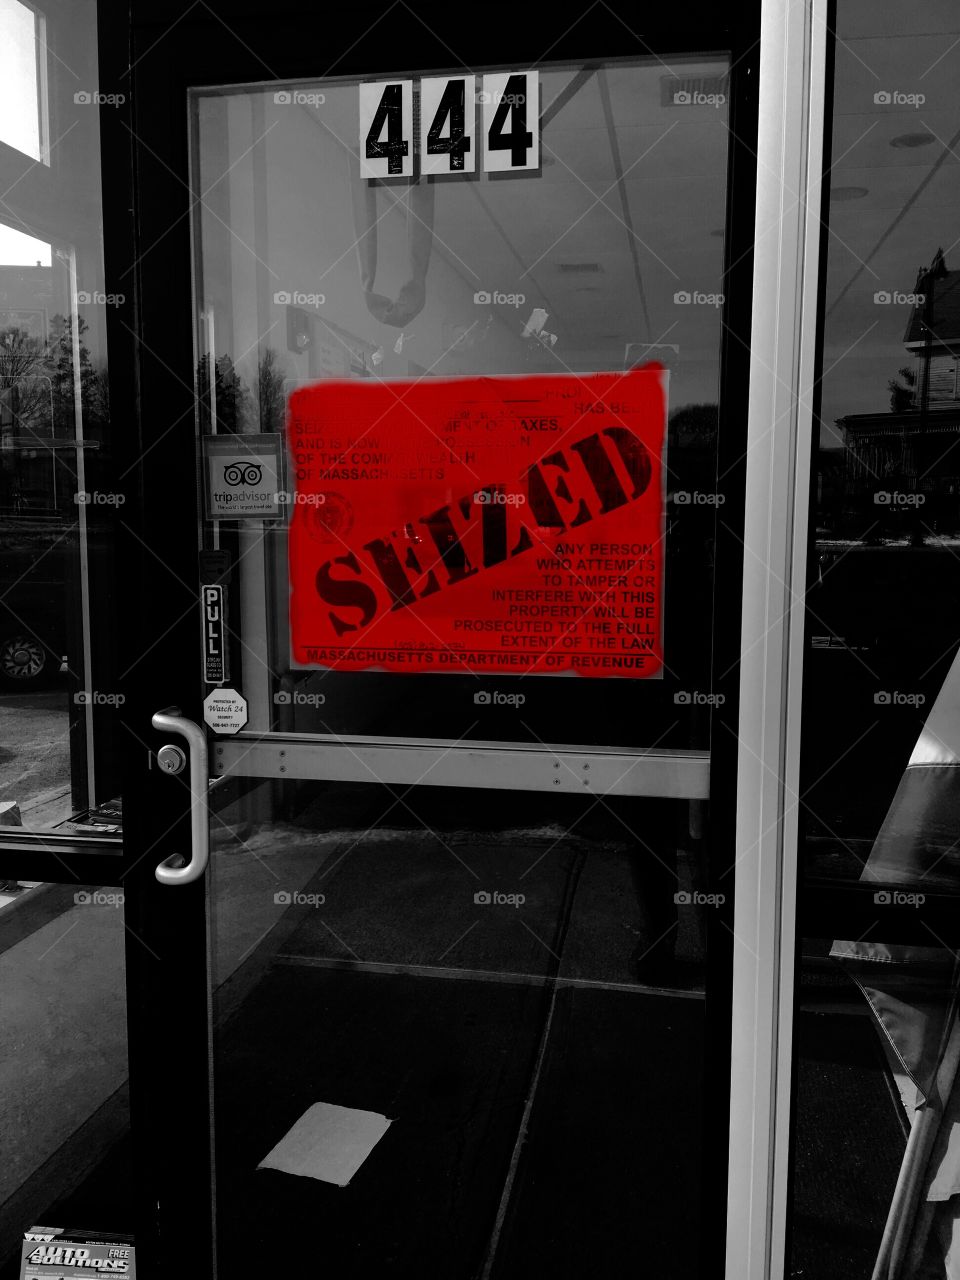 Seized sign on business door, bright orange!

Sign of the times today as businesses are closed. This was obviously a forced closure for some reason. Sign was on every door, never saw one of these & felt bad.